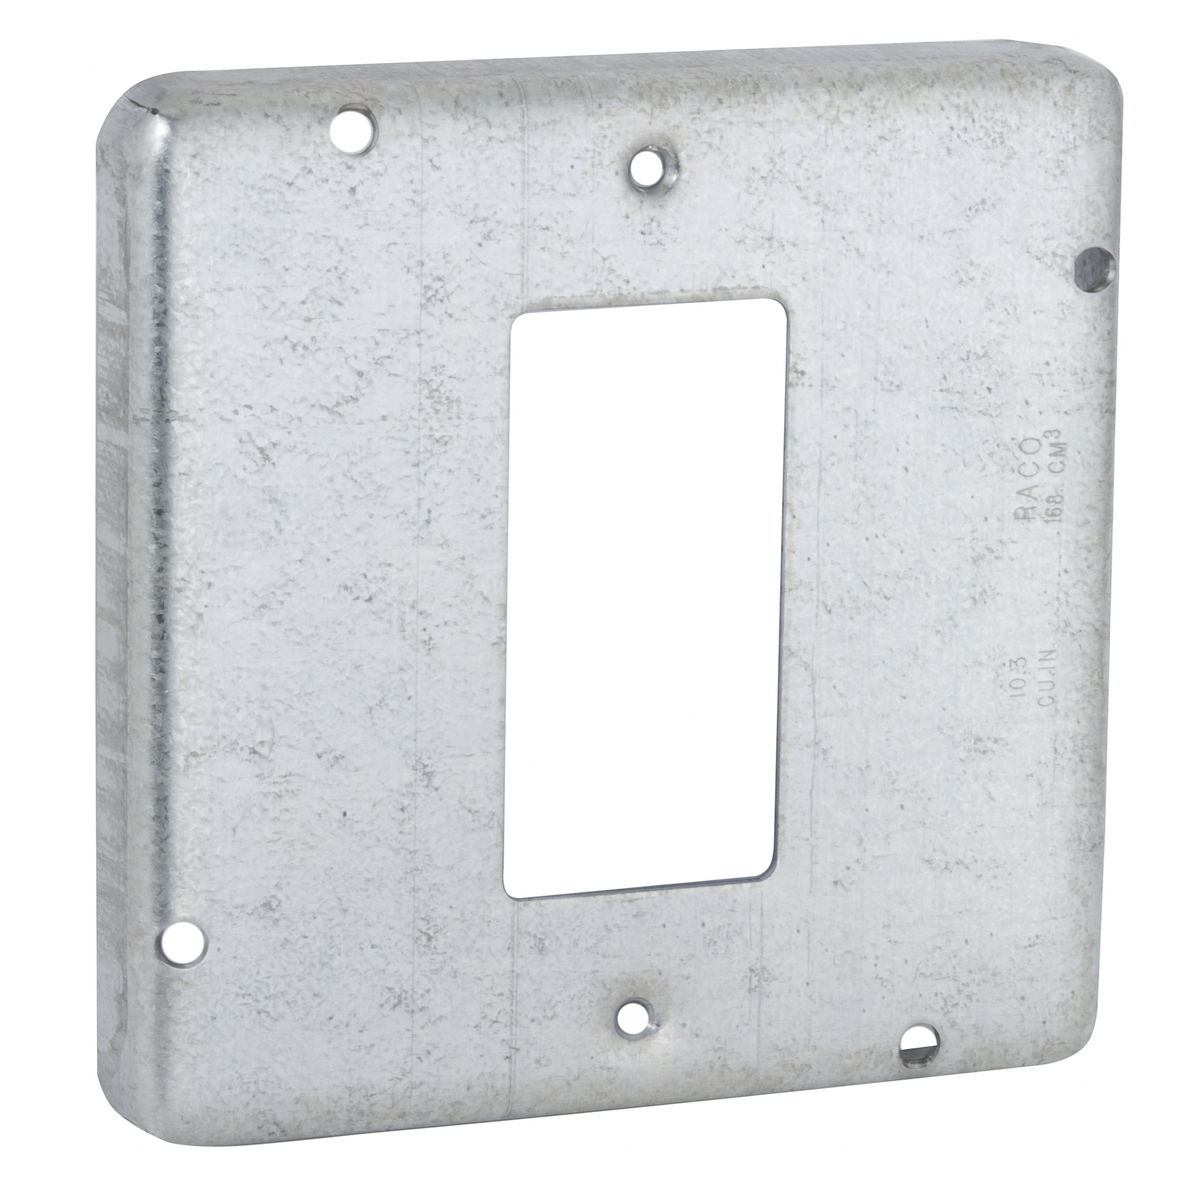 4-11/16 In. Square Exposed Work Covers, 1 GFCI